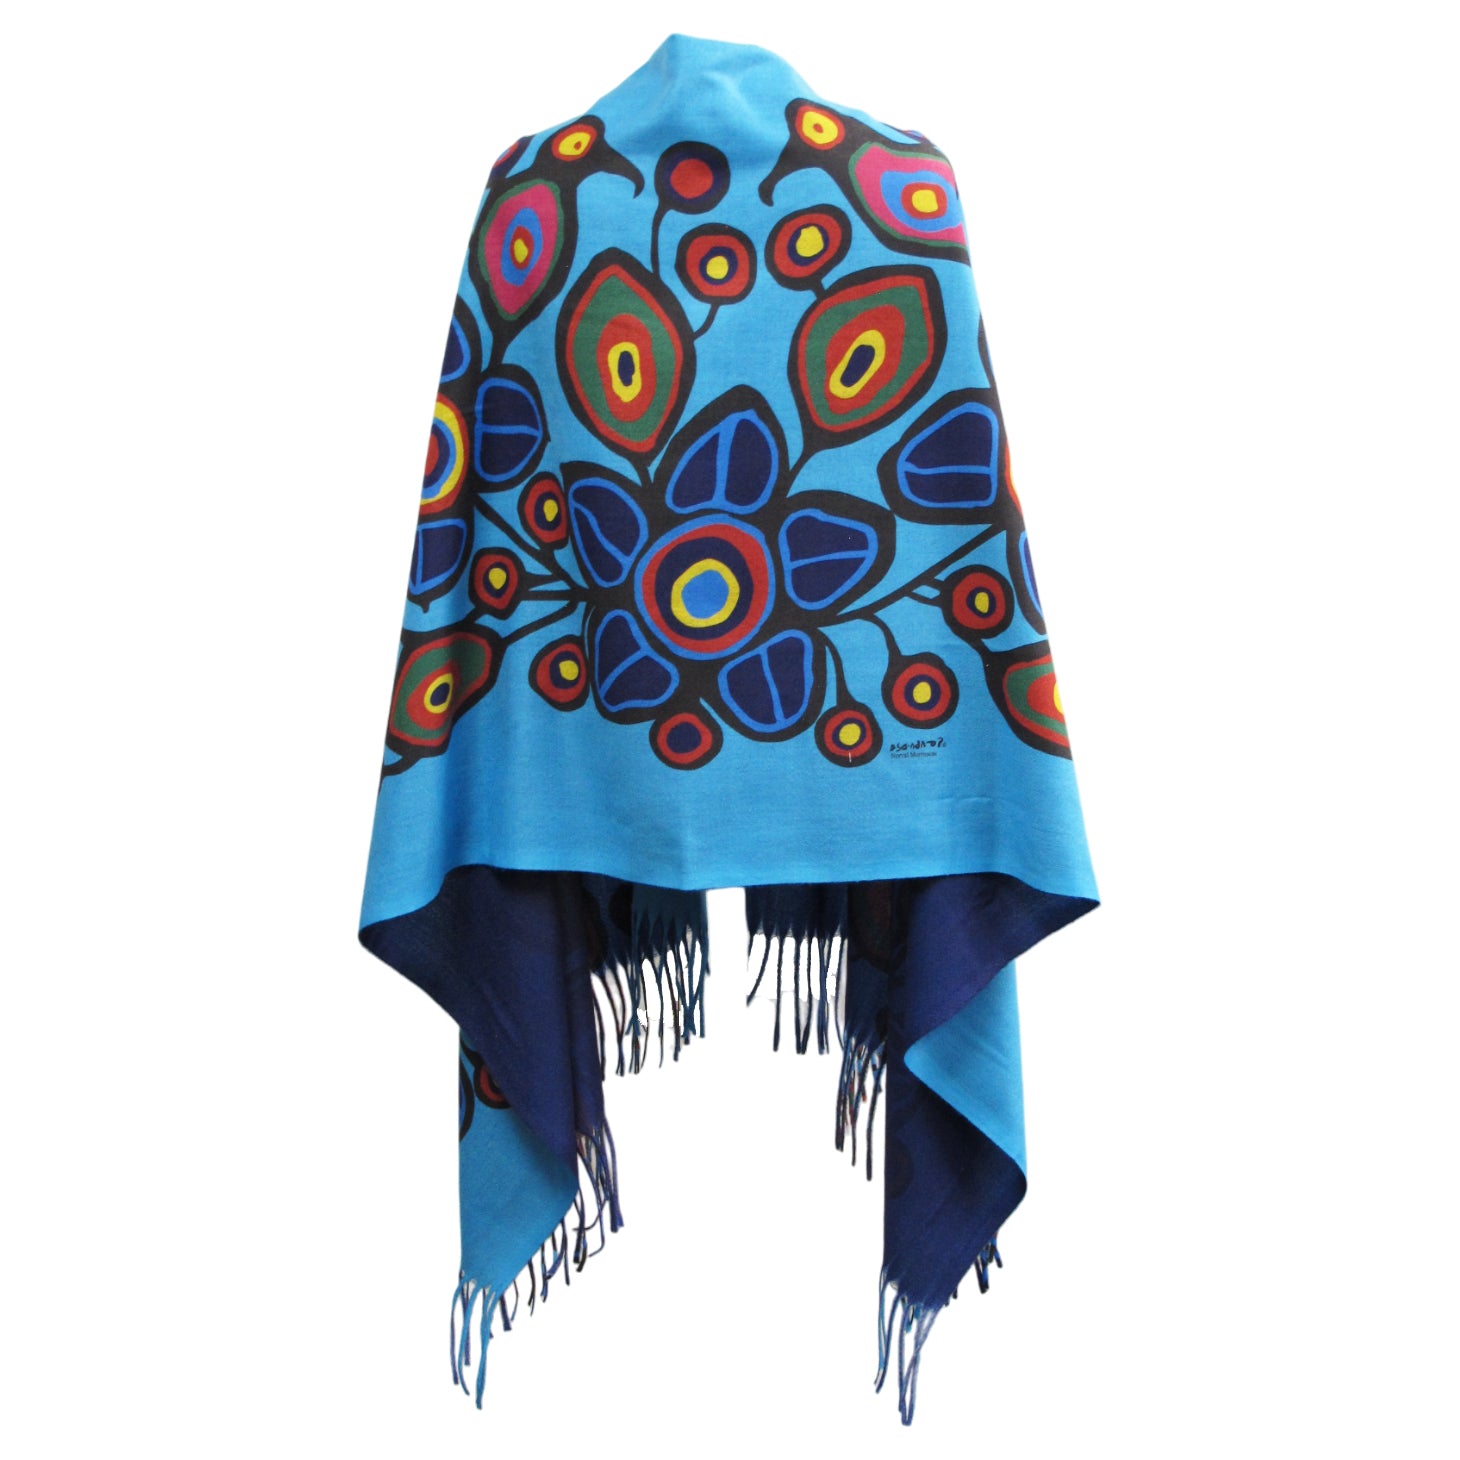 Norval Morrisseau Flowers and Birds Eco-Shawl